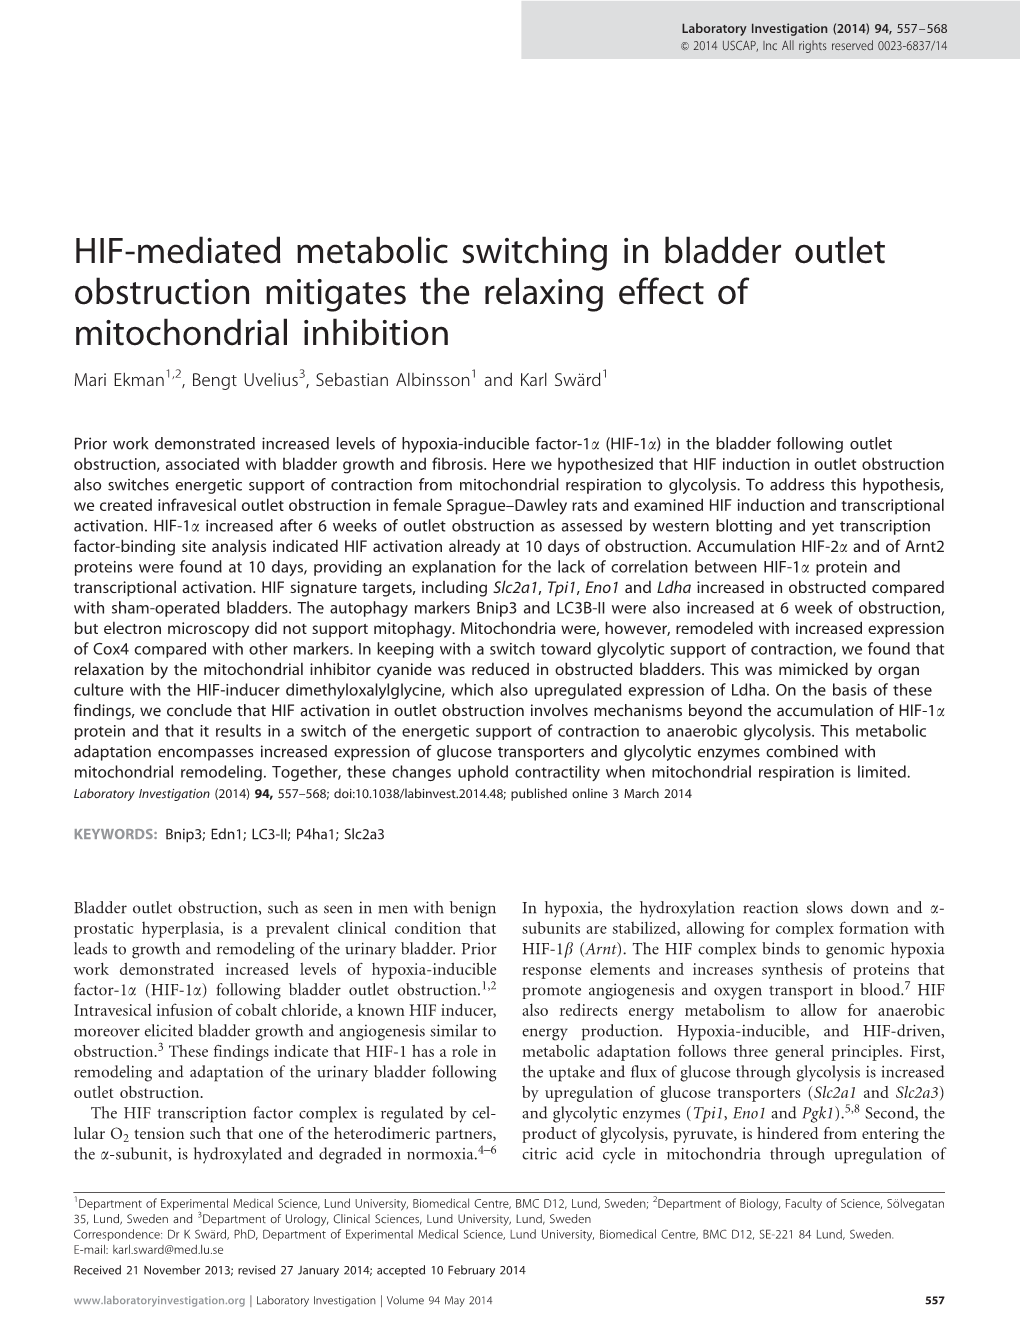 HIF-Mediated Metabolic Switching in Bladder Outlet Obstruction Mitigates the Relaxing Effect of Mitochondrial Inhibition